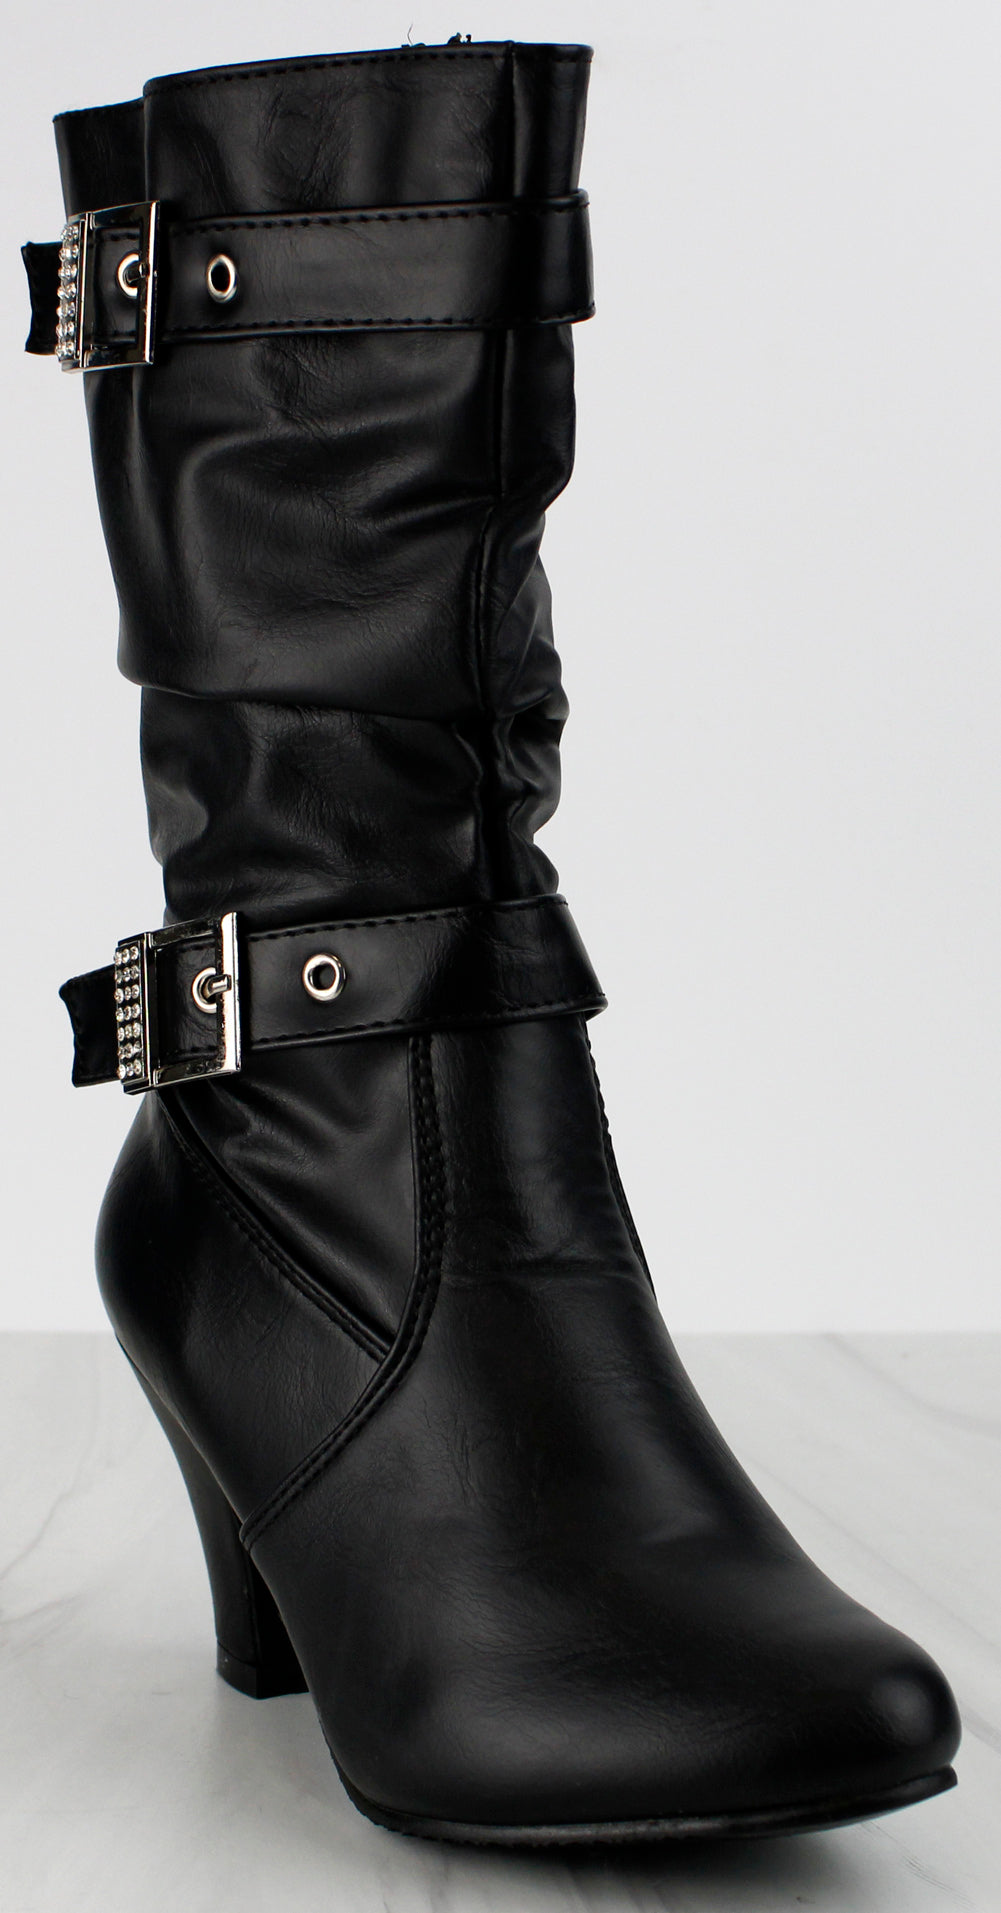 Knee-high leather boots in brown - Chloe Kids | Mytheresa